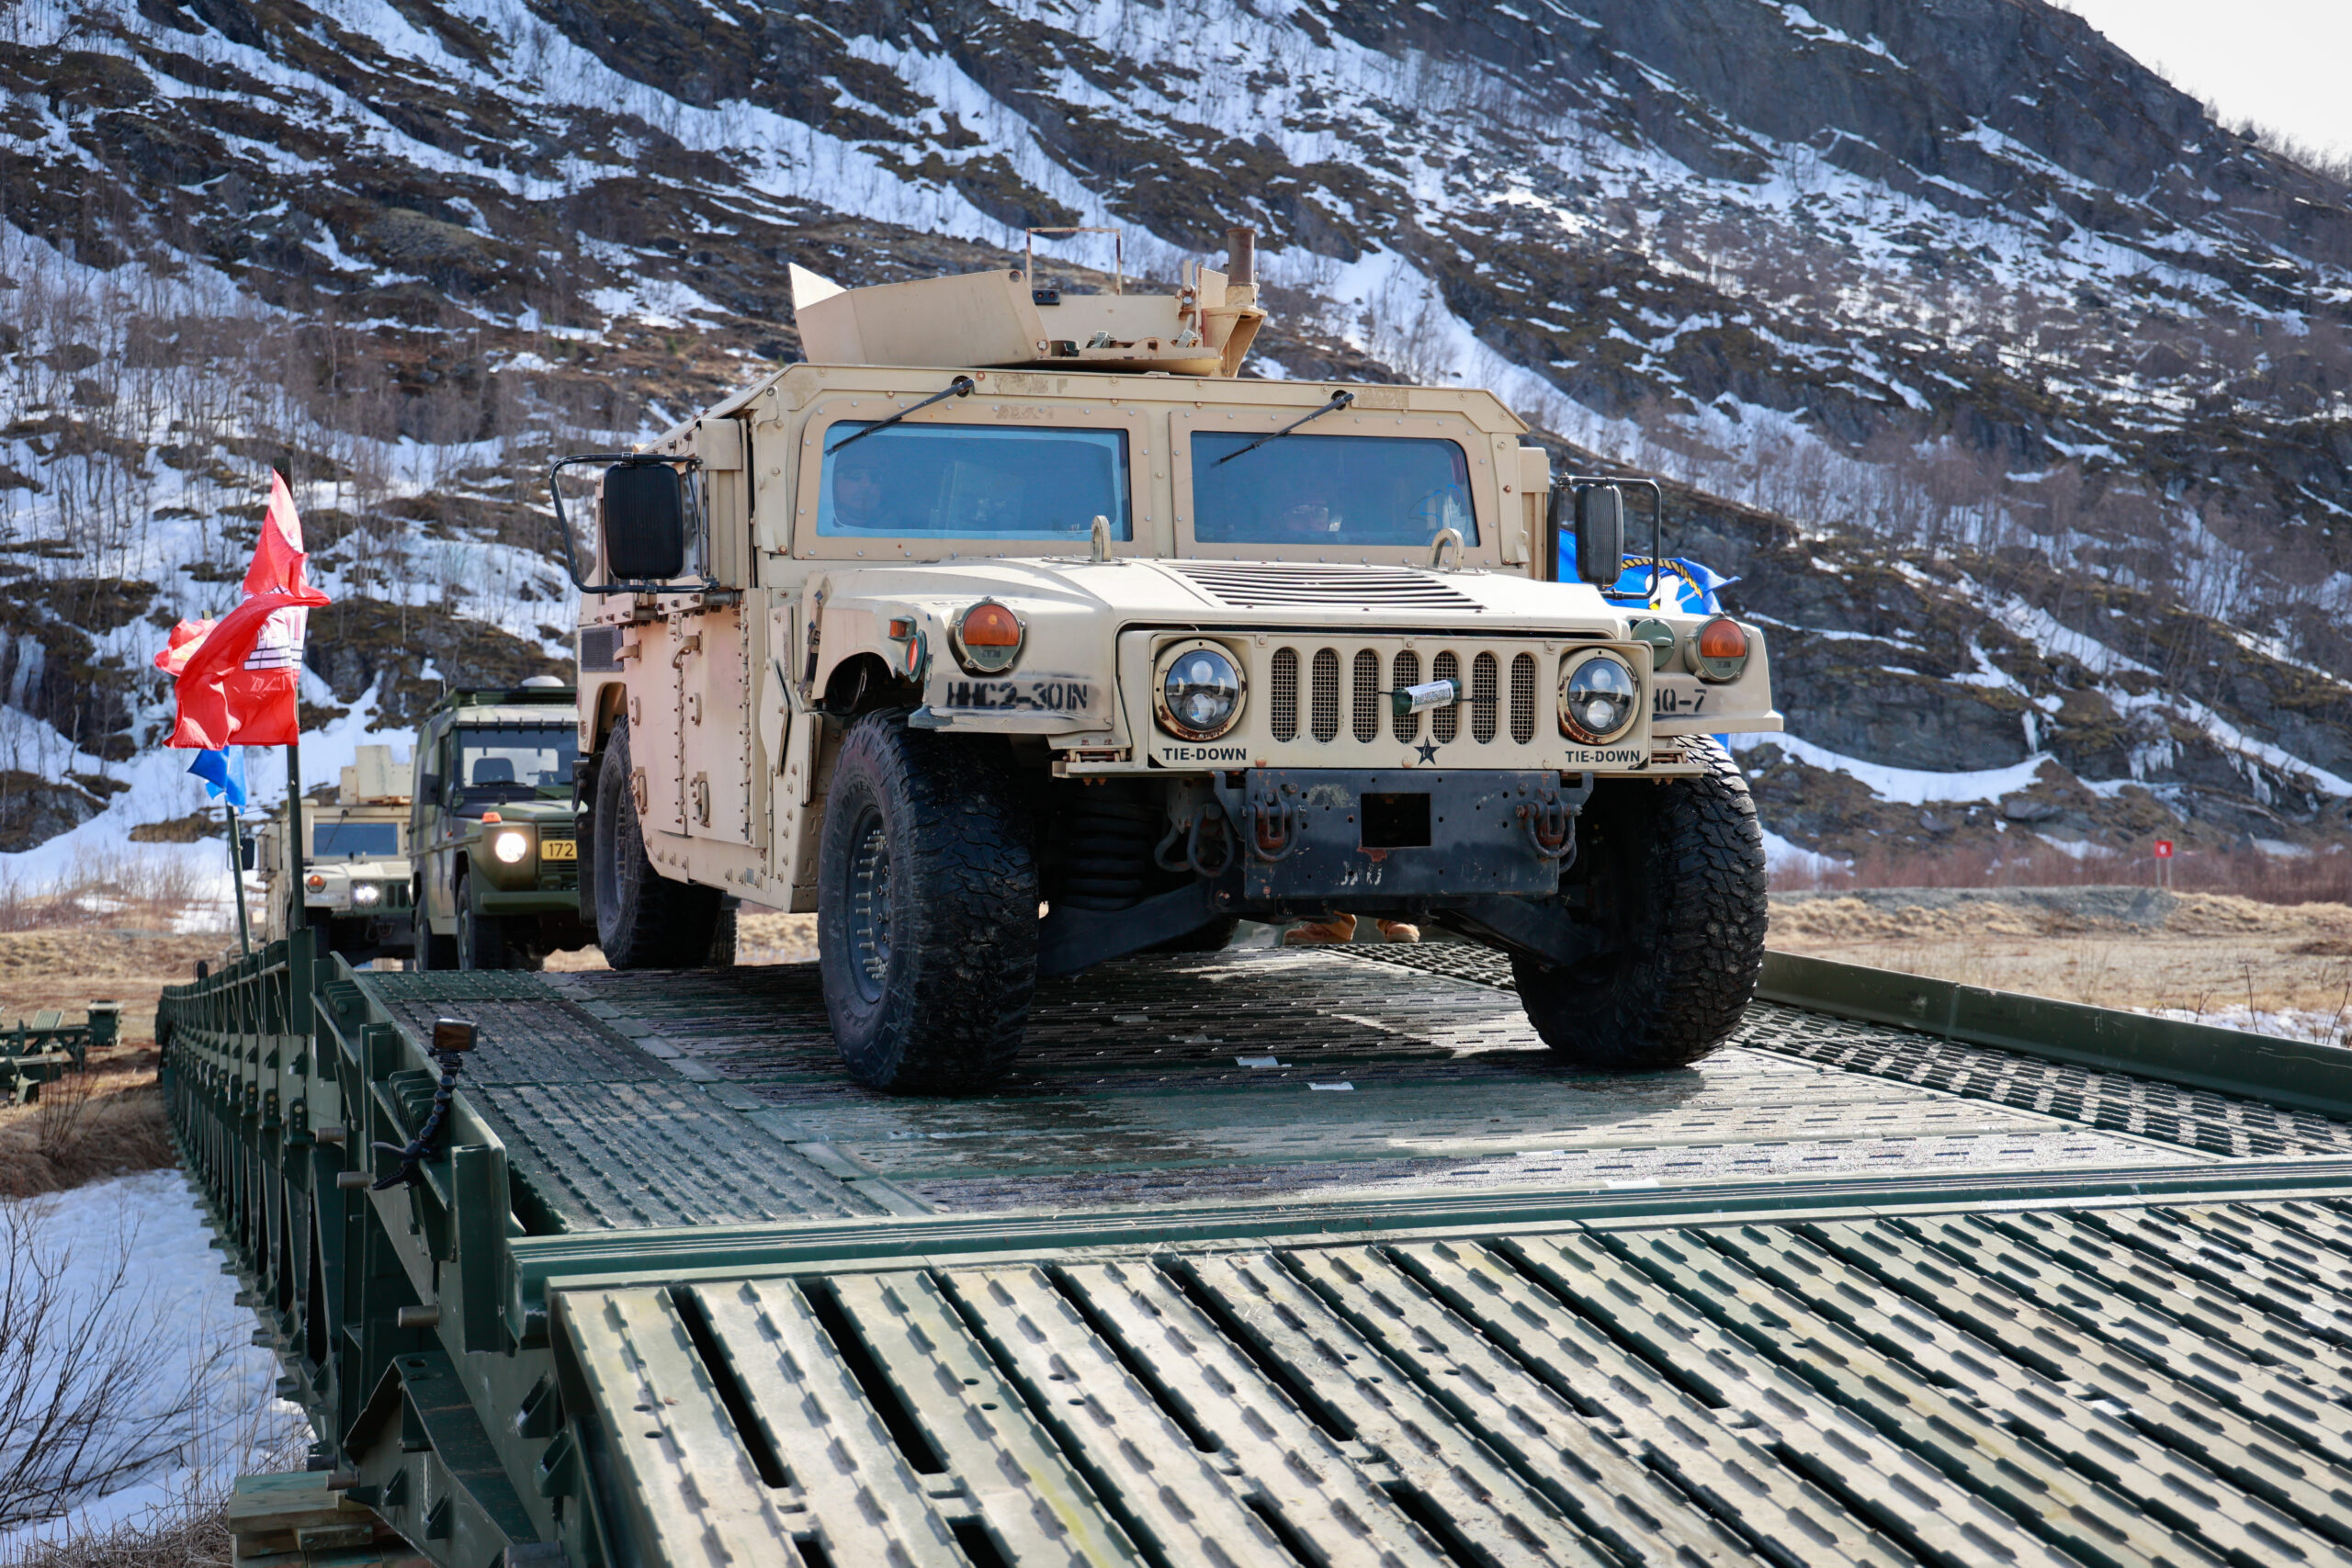 U.S. Army Soldiers from 3rd Brigade Combat Team, 10th Mountain Division, drive a humvee across a medium girder bridge in Evenes, Norway, on April 26, 2024. As a part of DEFENDER 24, the U.S. Navy, U.S. Army, and Norwegian army stood up a medium girder bridge for the first time in Norway to test its functionality. Military exercises involving Allies and partner nations in the European theater remain an integral part of demonstrating readiness, interoperability, and capability. DEFENDER is the Dynamic Employment of Forces to Europe for NATO Deterrence and Enhanced Readiness, and is a U.S. European Command scheduled, U.S. Army Europe and Africa conducted exercise that consists of Saber Strike, Immediate Response, and Swift Response. DEFENDER 24 is linked to NATO’s Steadfast Defender exercise, and DoD’s Large Scale Global Exercise, taking place from 28 March to 31 May. DEFENDER 24 is the largest U.S. Army exercise in Europe and includes more than 17,000 U.S. and 23,000 multinational service members from more than 20 Allied and partner nations, including Croatia, Czechia, Denmark, Estonia, Finland, France, Germany, Georgia, Hungary, Italy, Latvia, Lithuania, Moldova, Netherlands, North Macedonia, Norway, Poland, Romania, Slovakia, Spain, Sweden, and the United Kingdom. (U.S. Army photo by Spc. Samuel Signor)